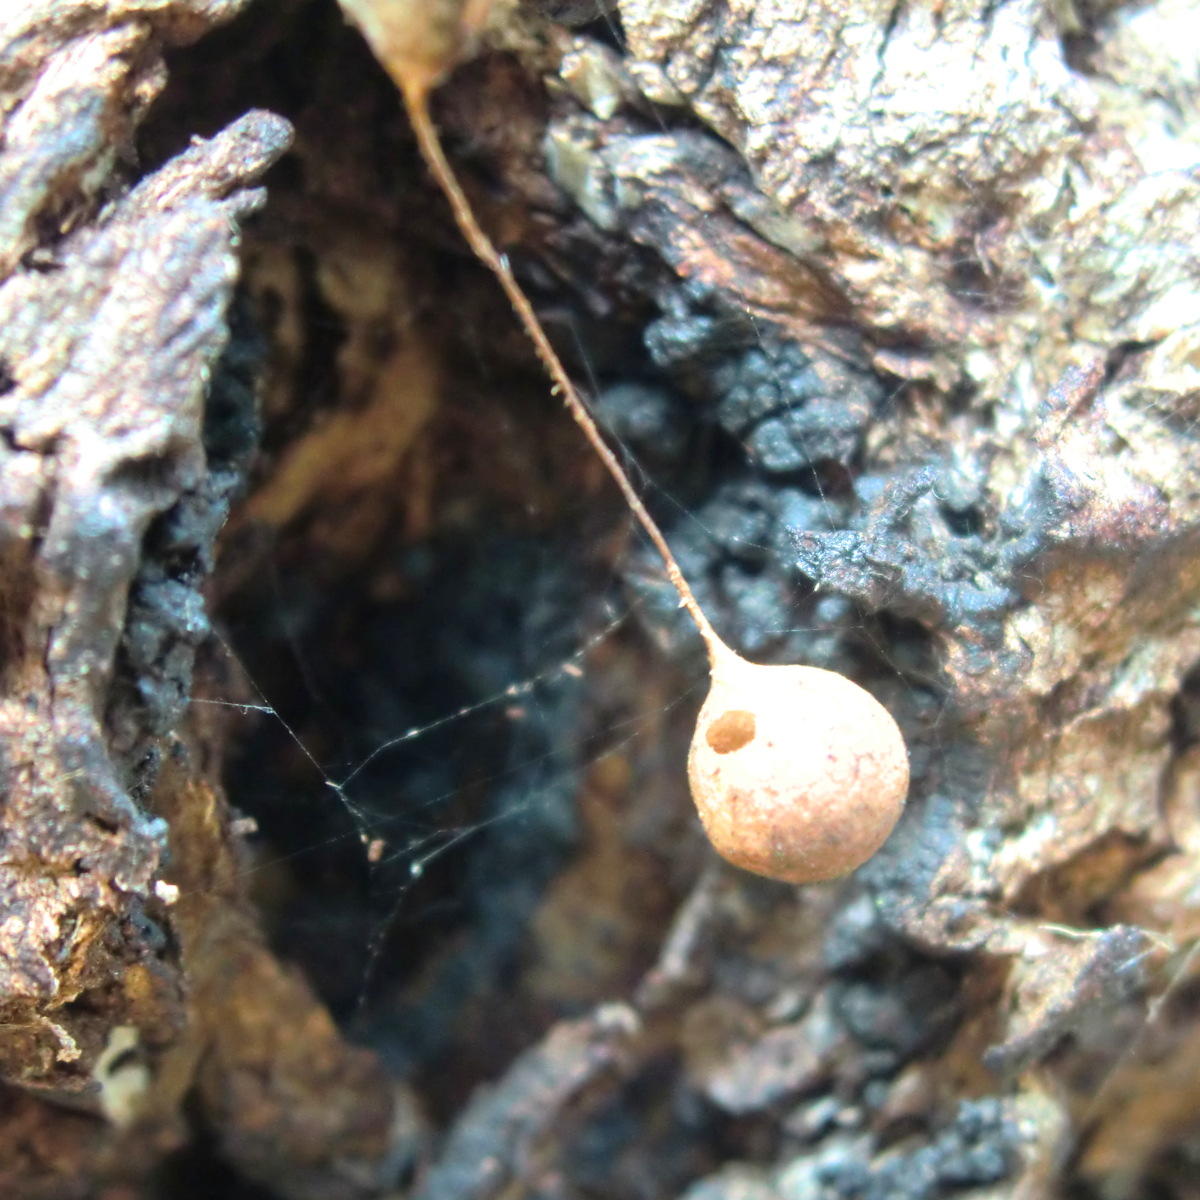 Spider ball on a string